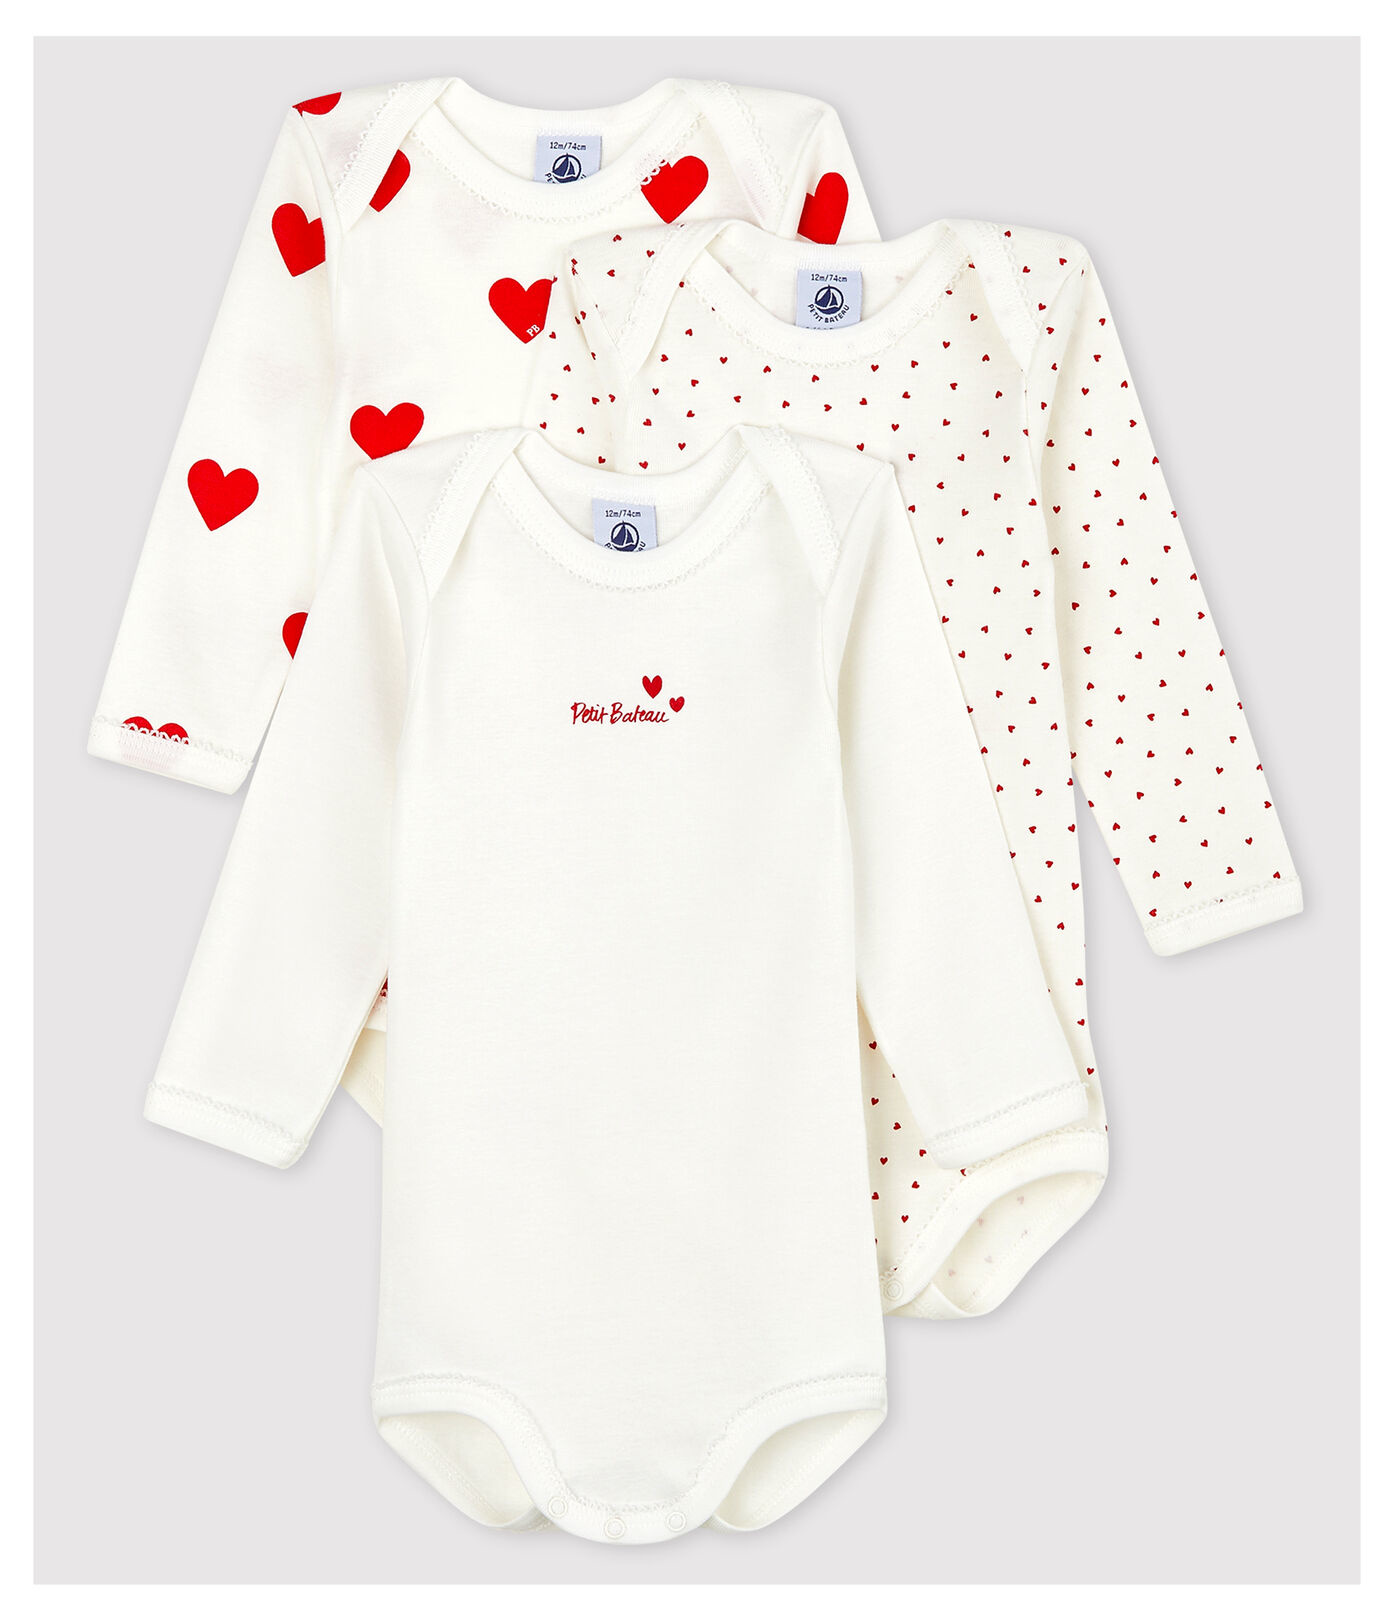 Petit Bateau SET OF 3 BODIES LONG SLEEVES BABY HEART COTTON - igloobaby